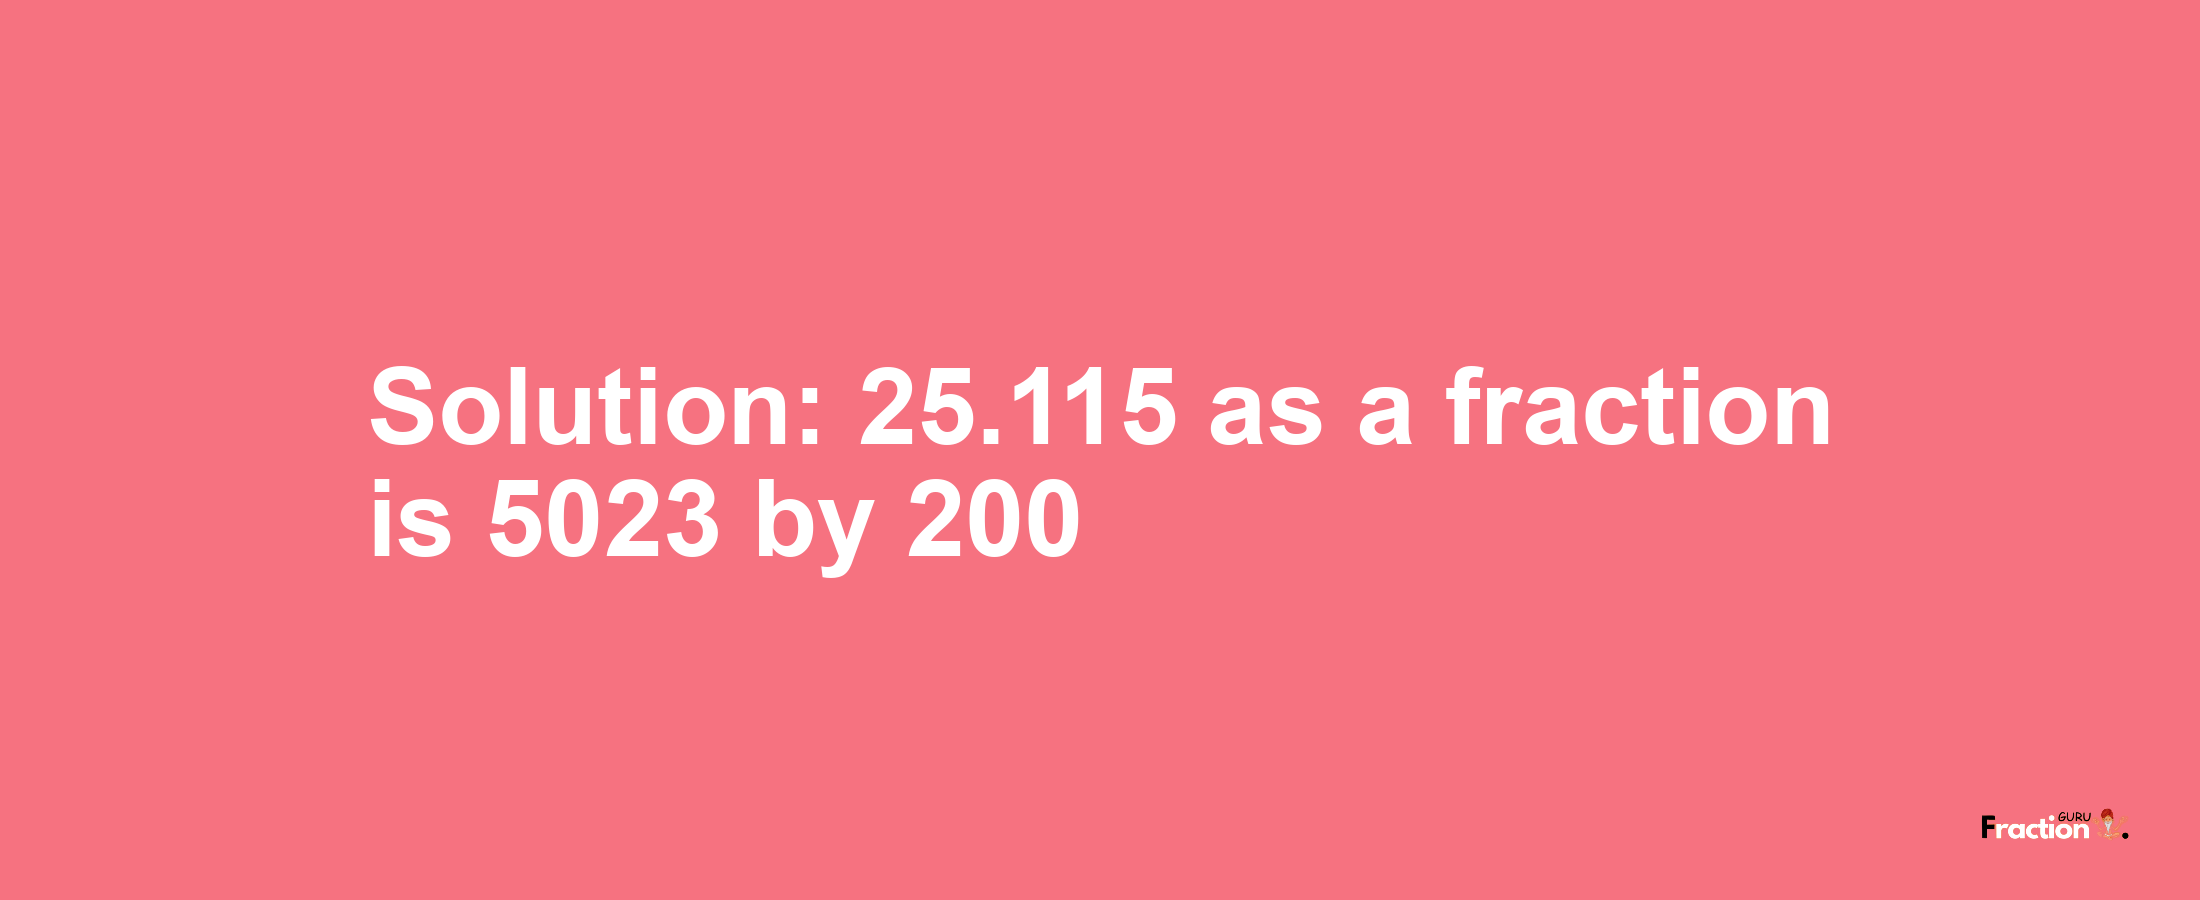 Solution:25.115 as a fraction is 5023/200